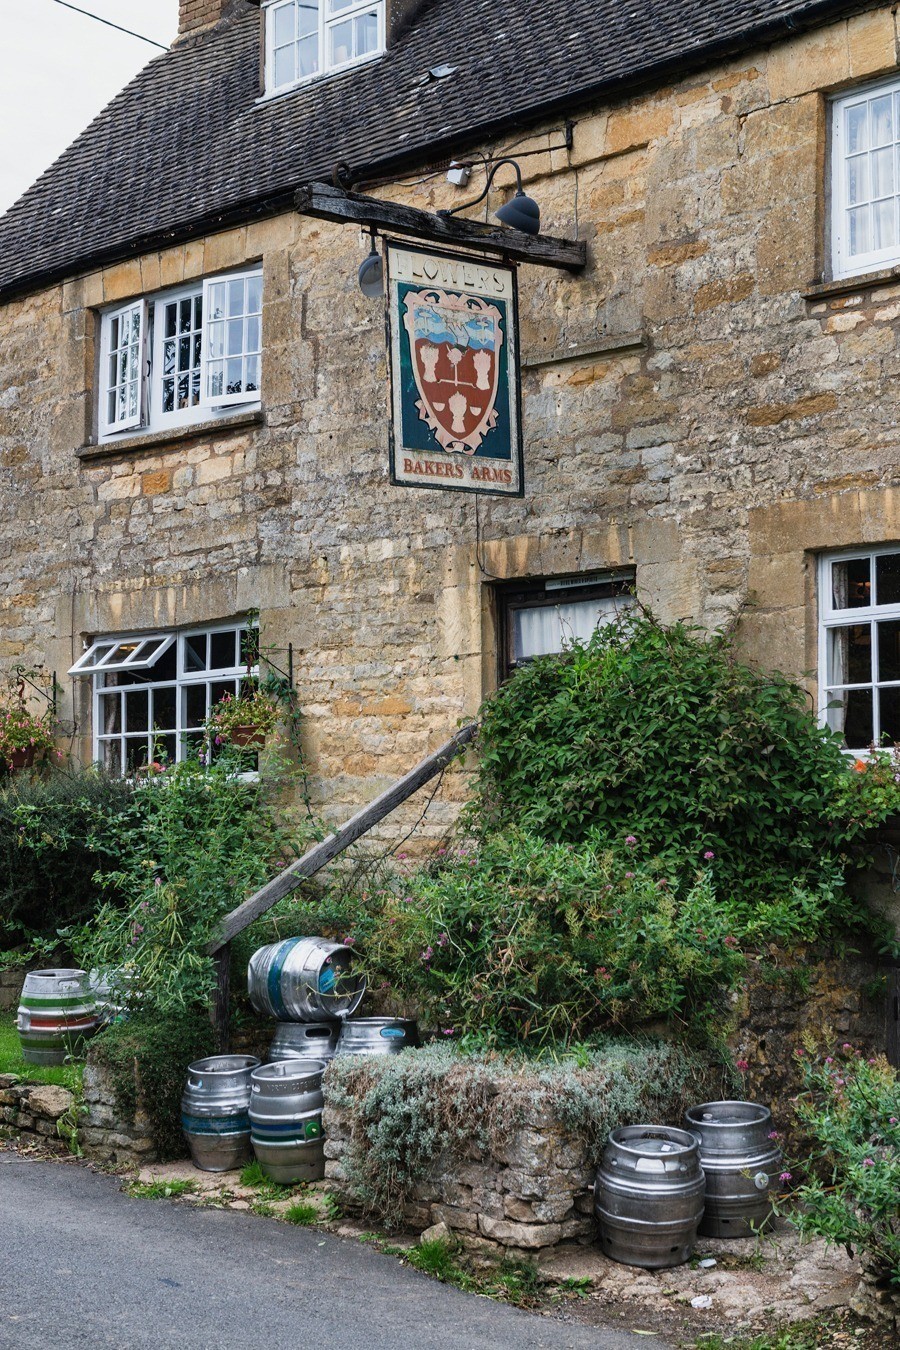 Bakers Arms Pub in Broad Campden, Cotswolds, England